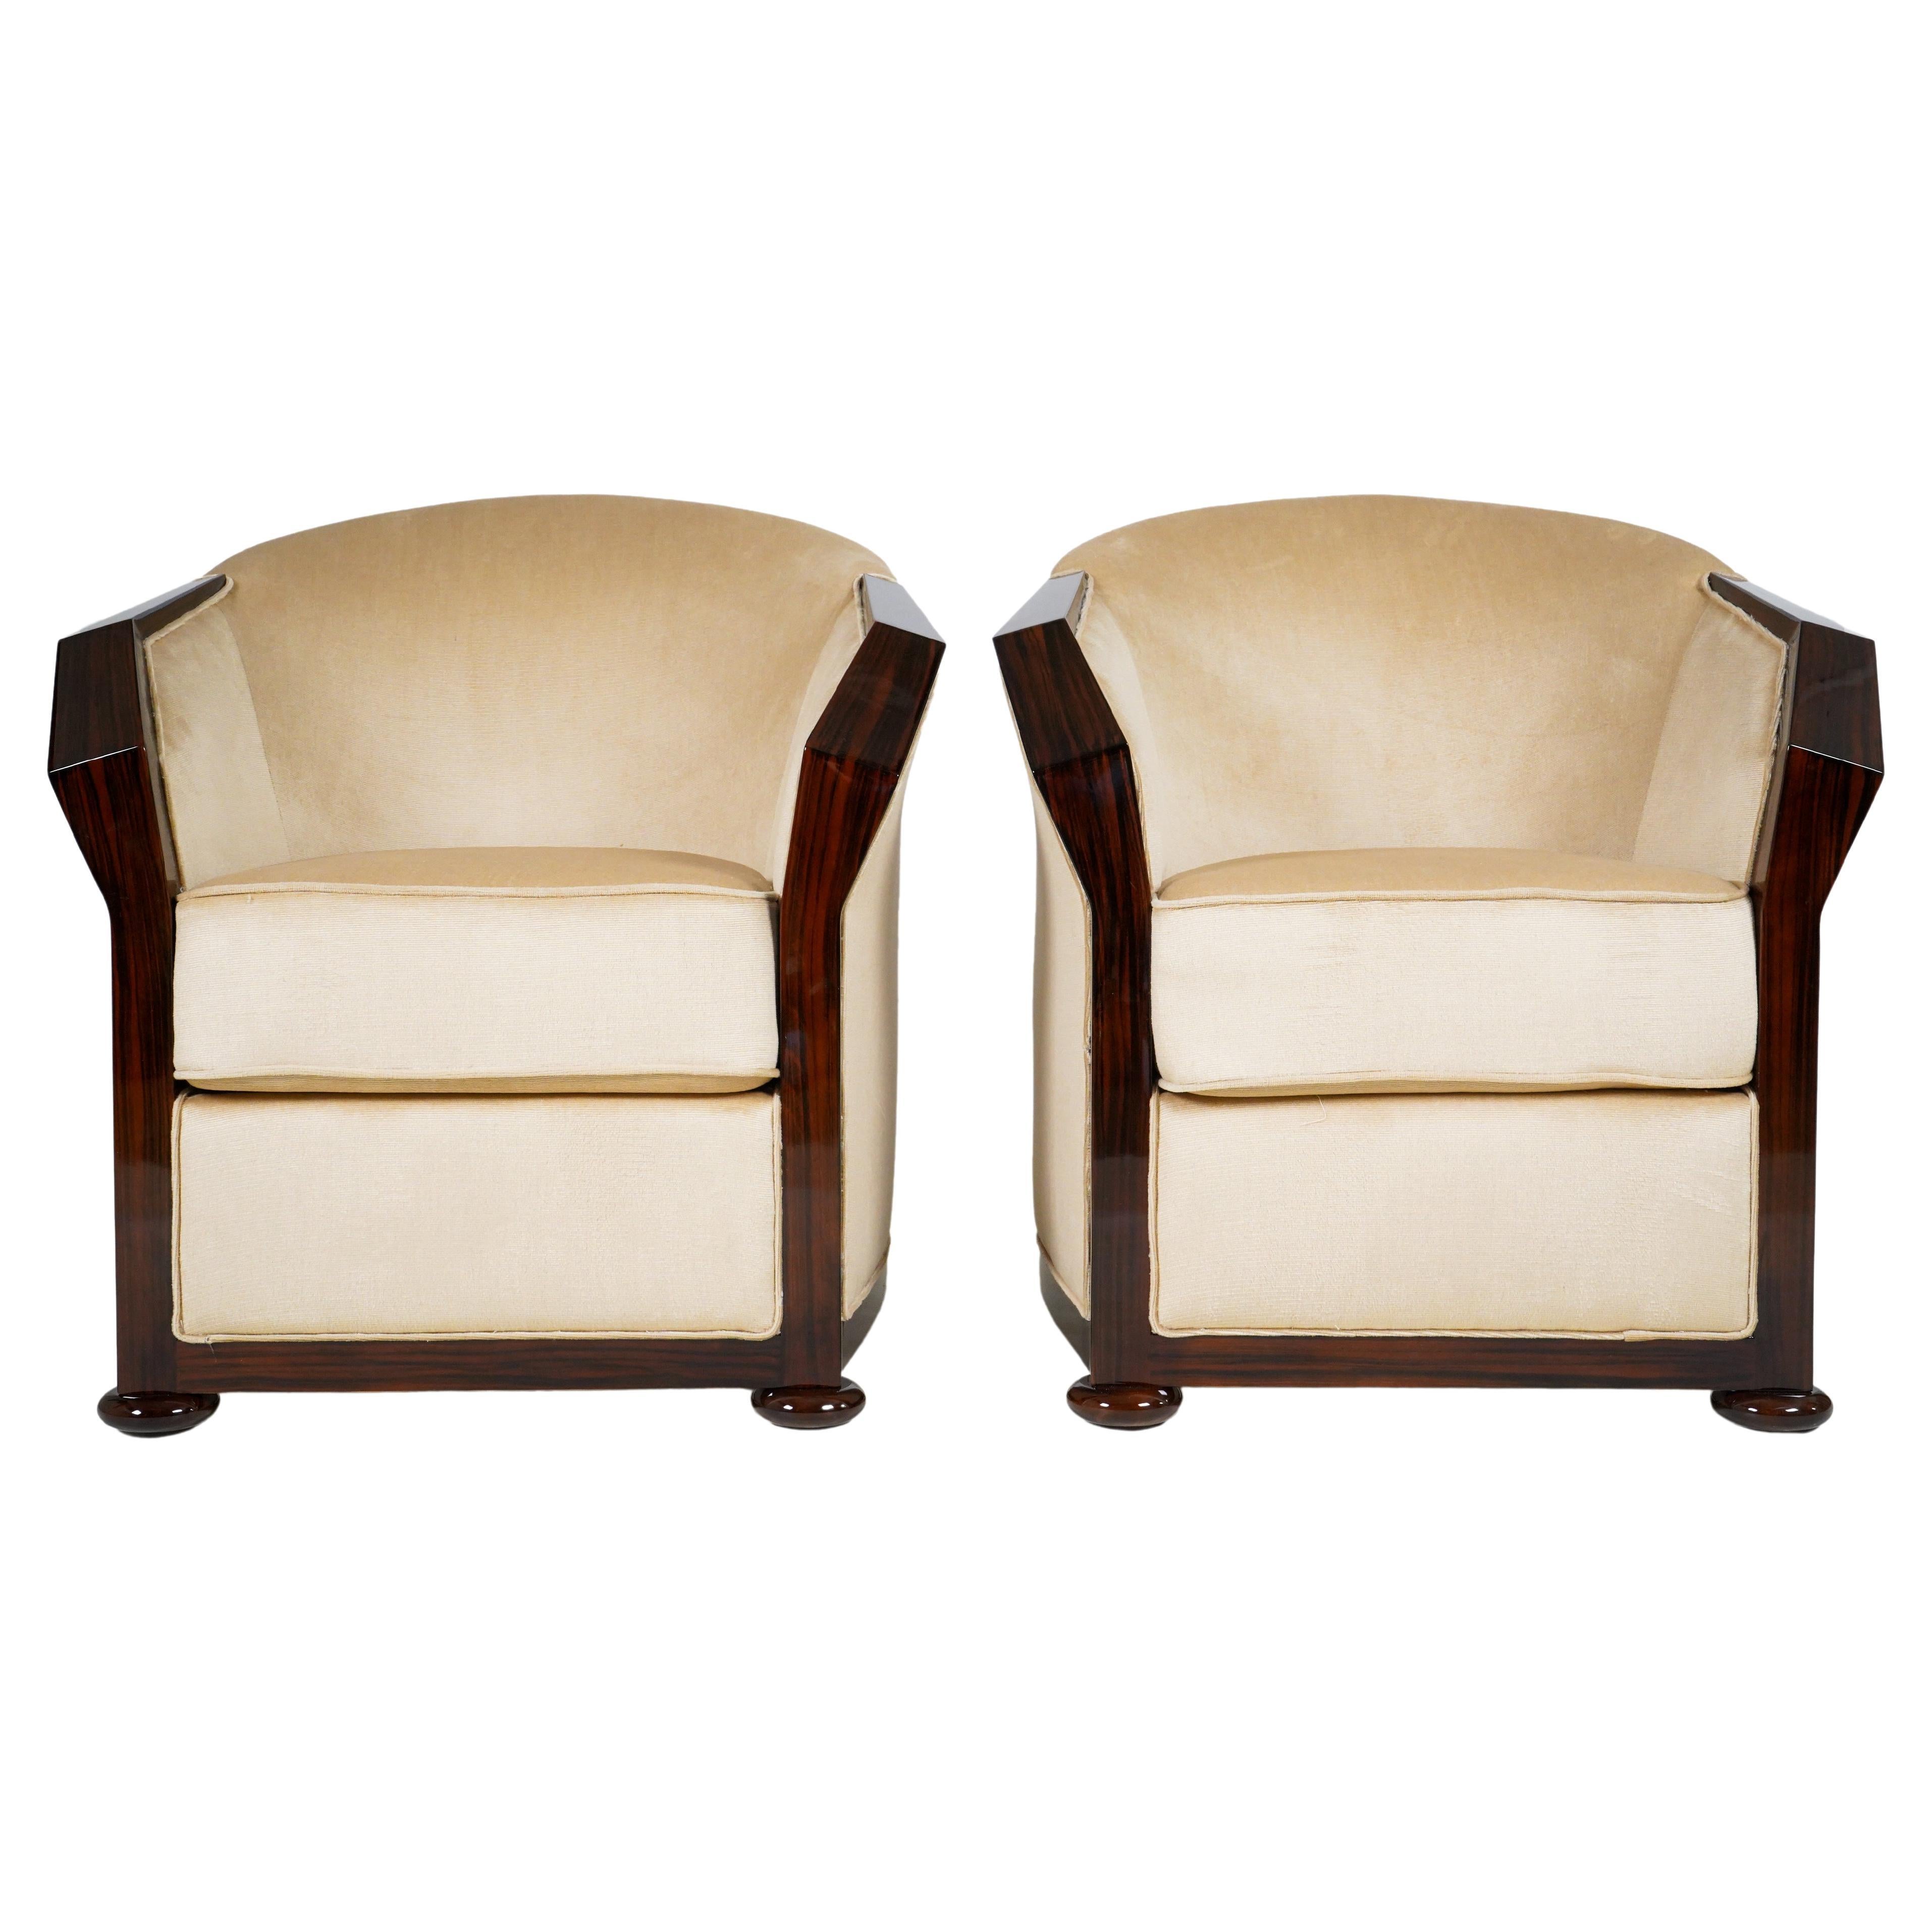 Pair of Art Deco Style Armchairs with Walnut Veneers For Sale